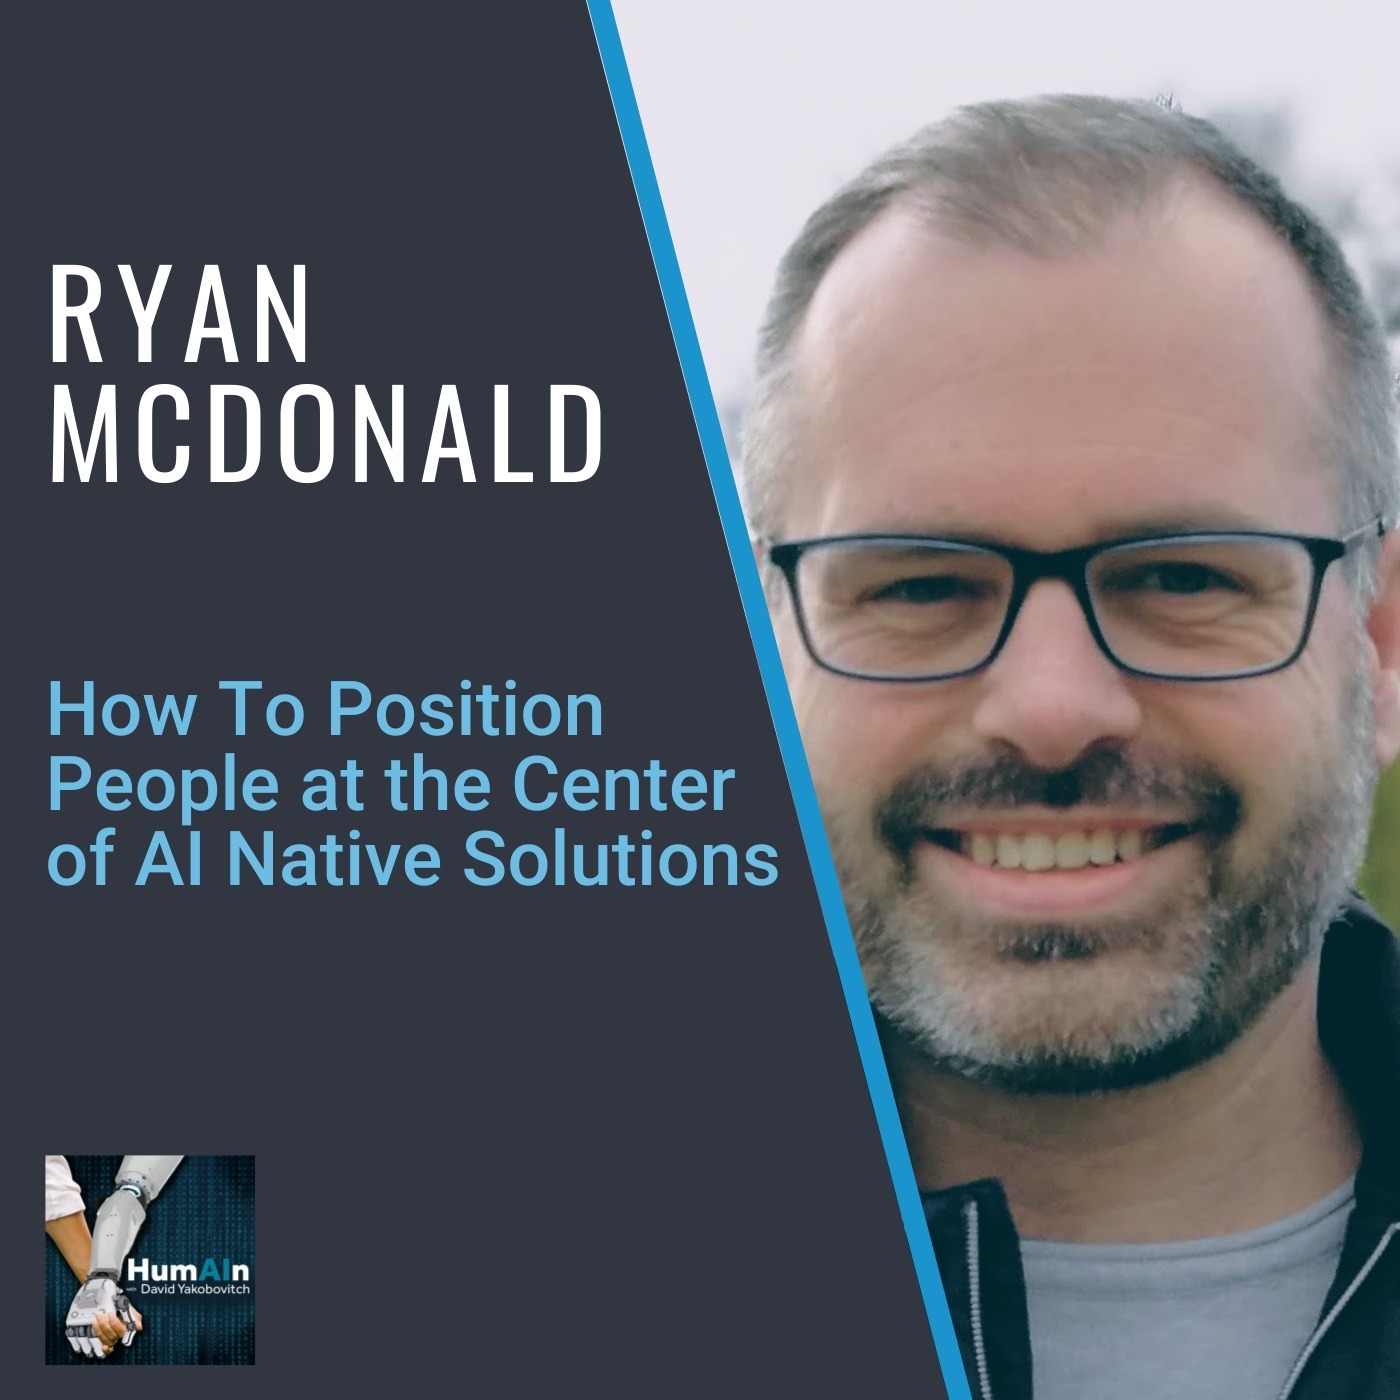 Ryan McDonald: How To Position People at the Center of AI Native Solutions